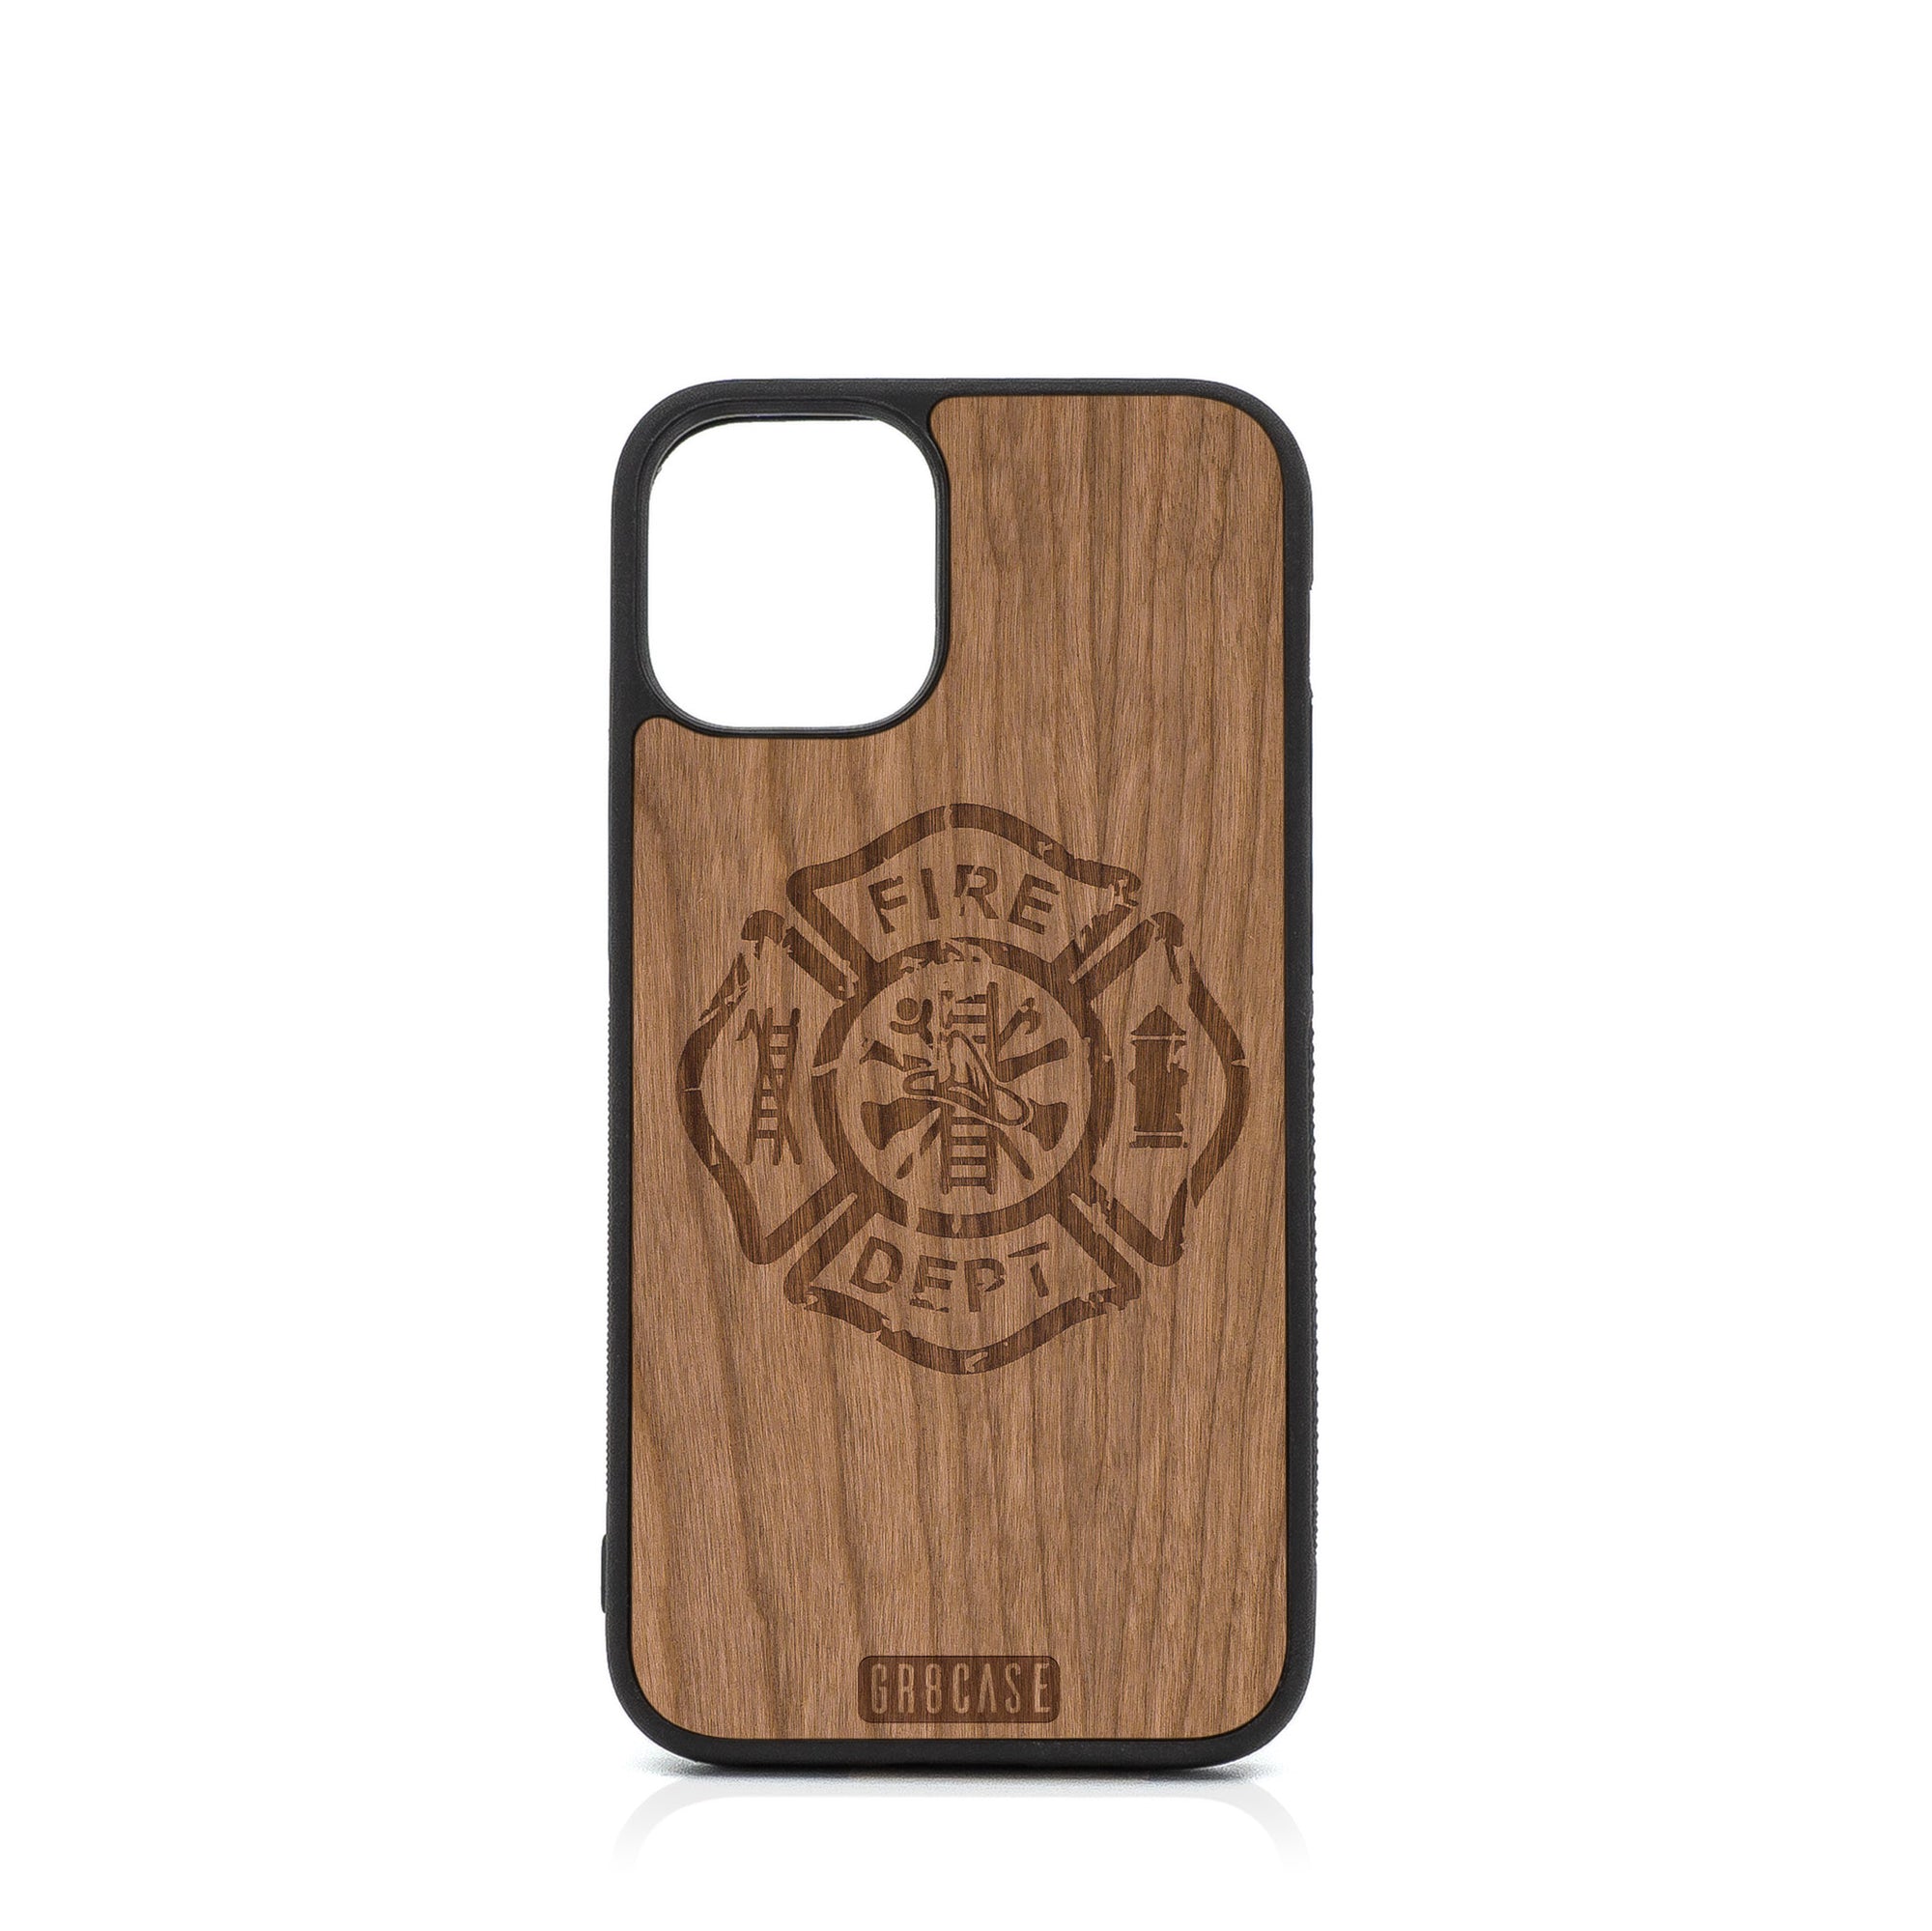 Fire Department Design Wood Case For iPhone 12 Mini